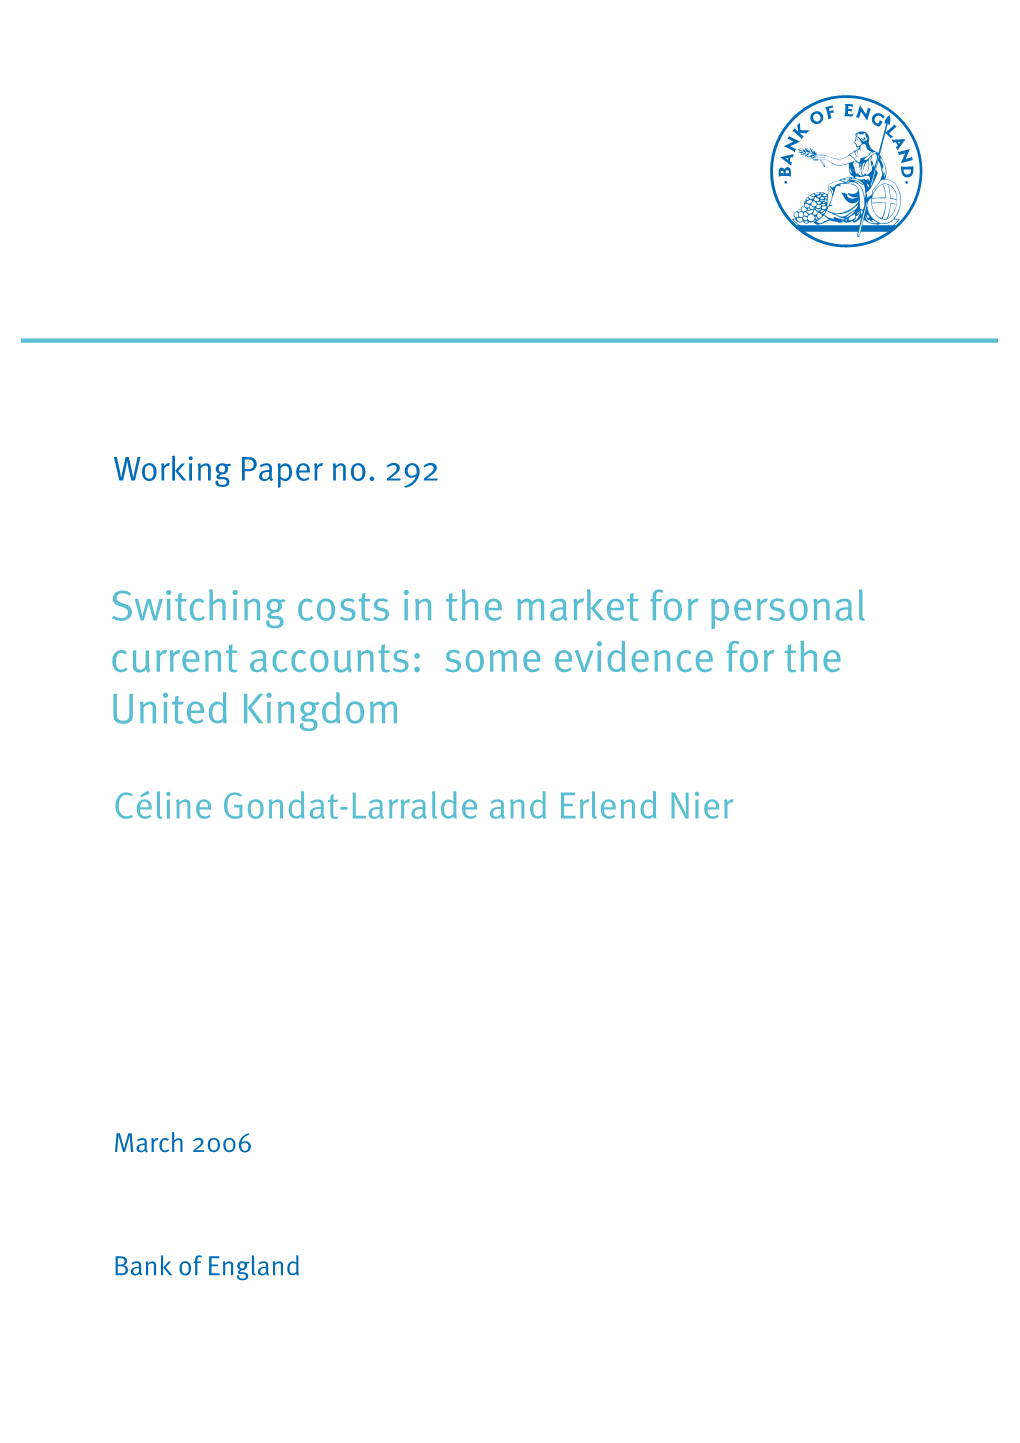 Switching Costs in the Market for Personal Current Accounts: Some Evidence for the United Kingdom